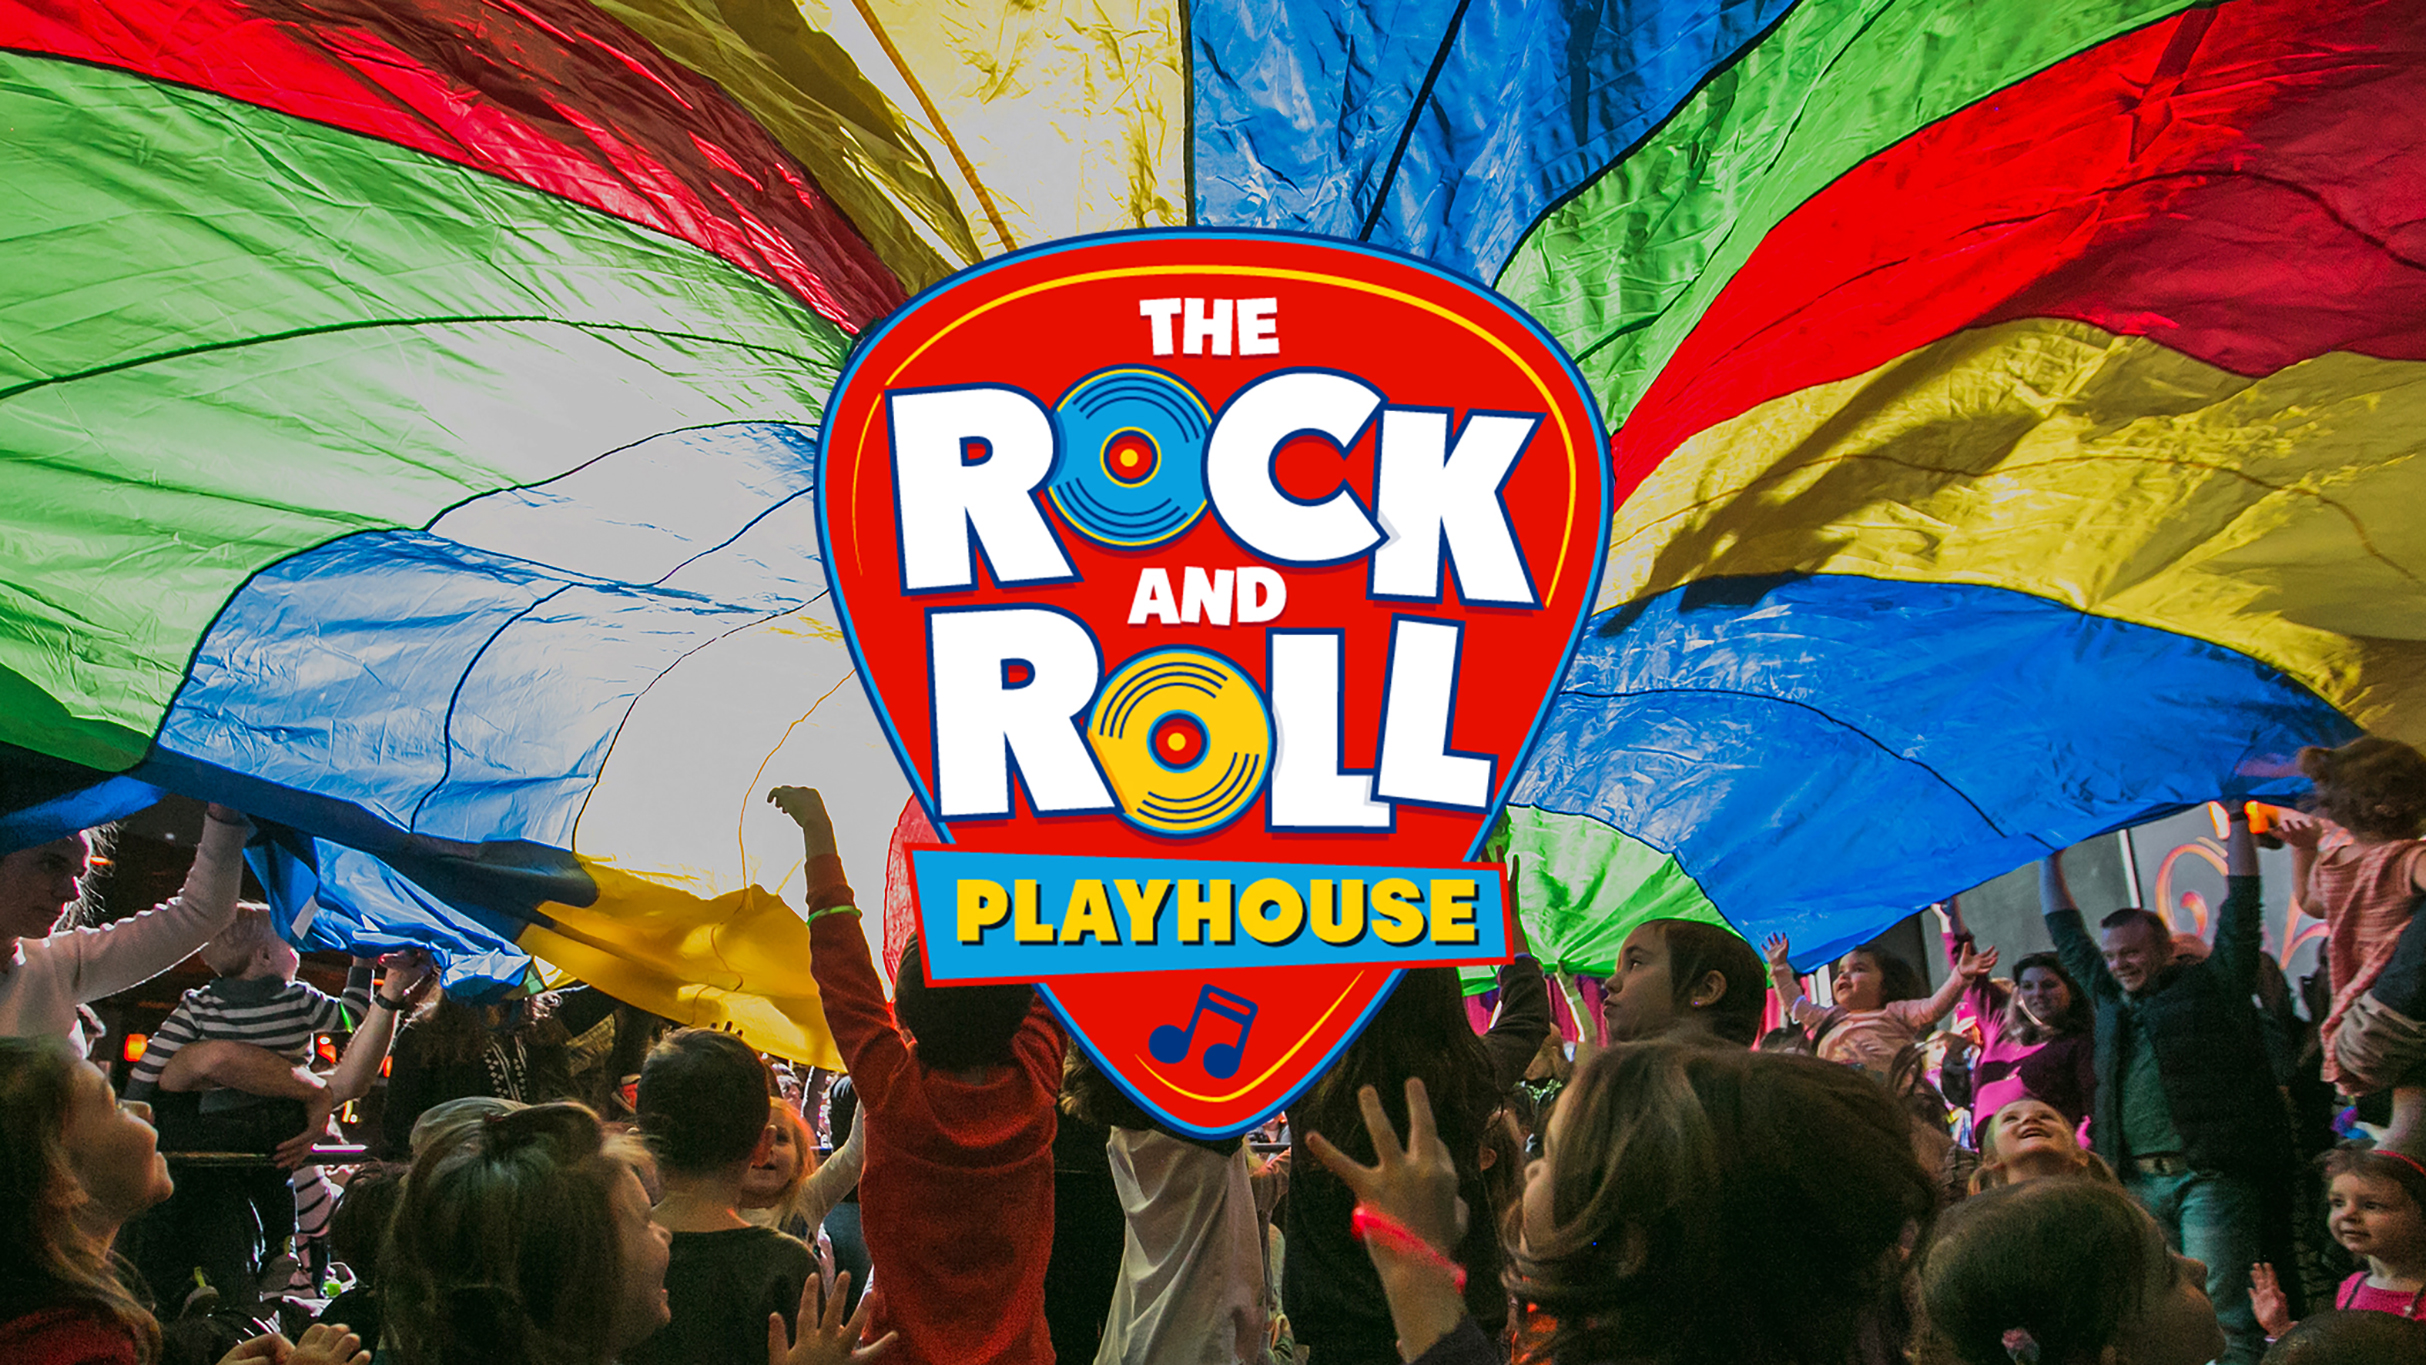 Rock And Roll Playhouse Plays The Music Of Bruce Springsteen For Kids